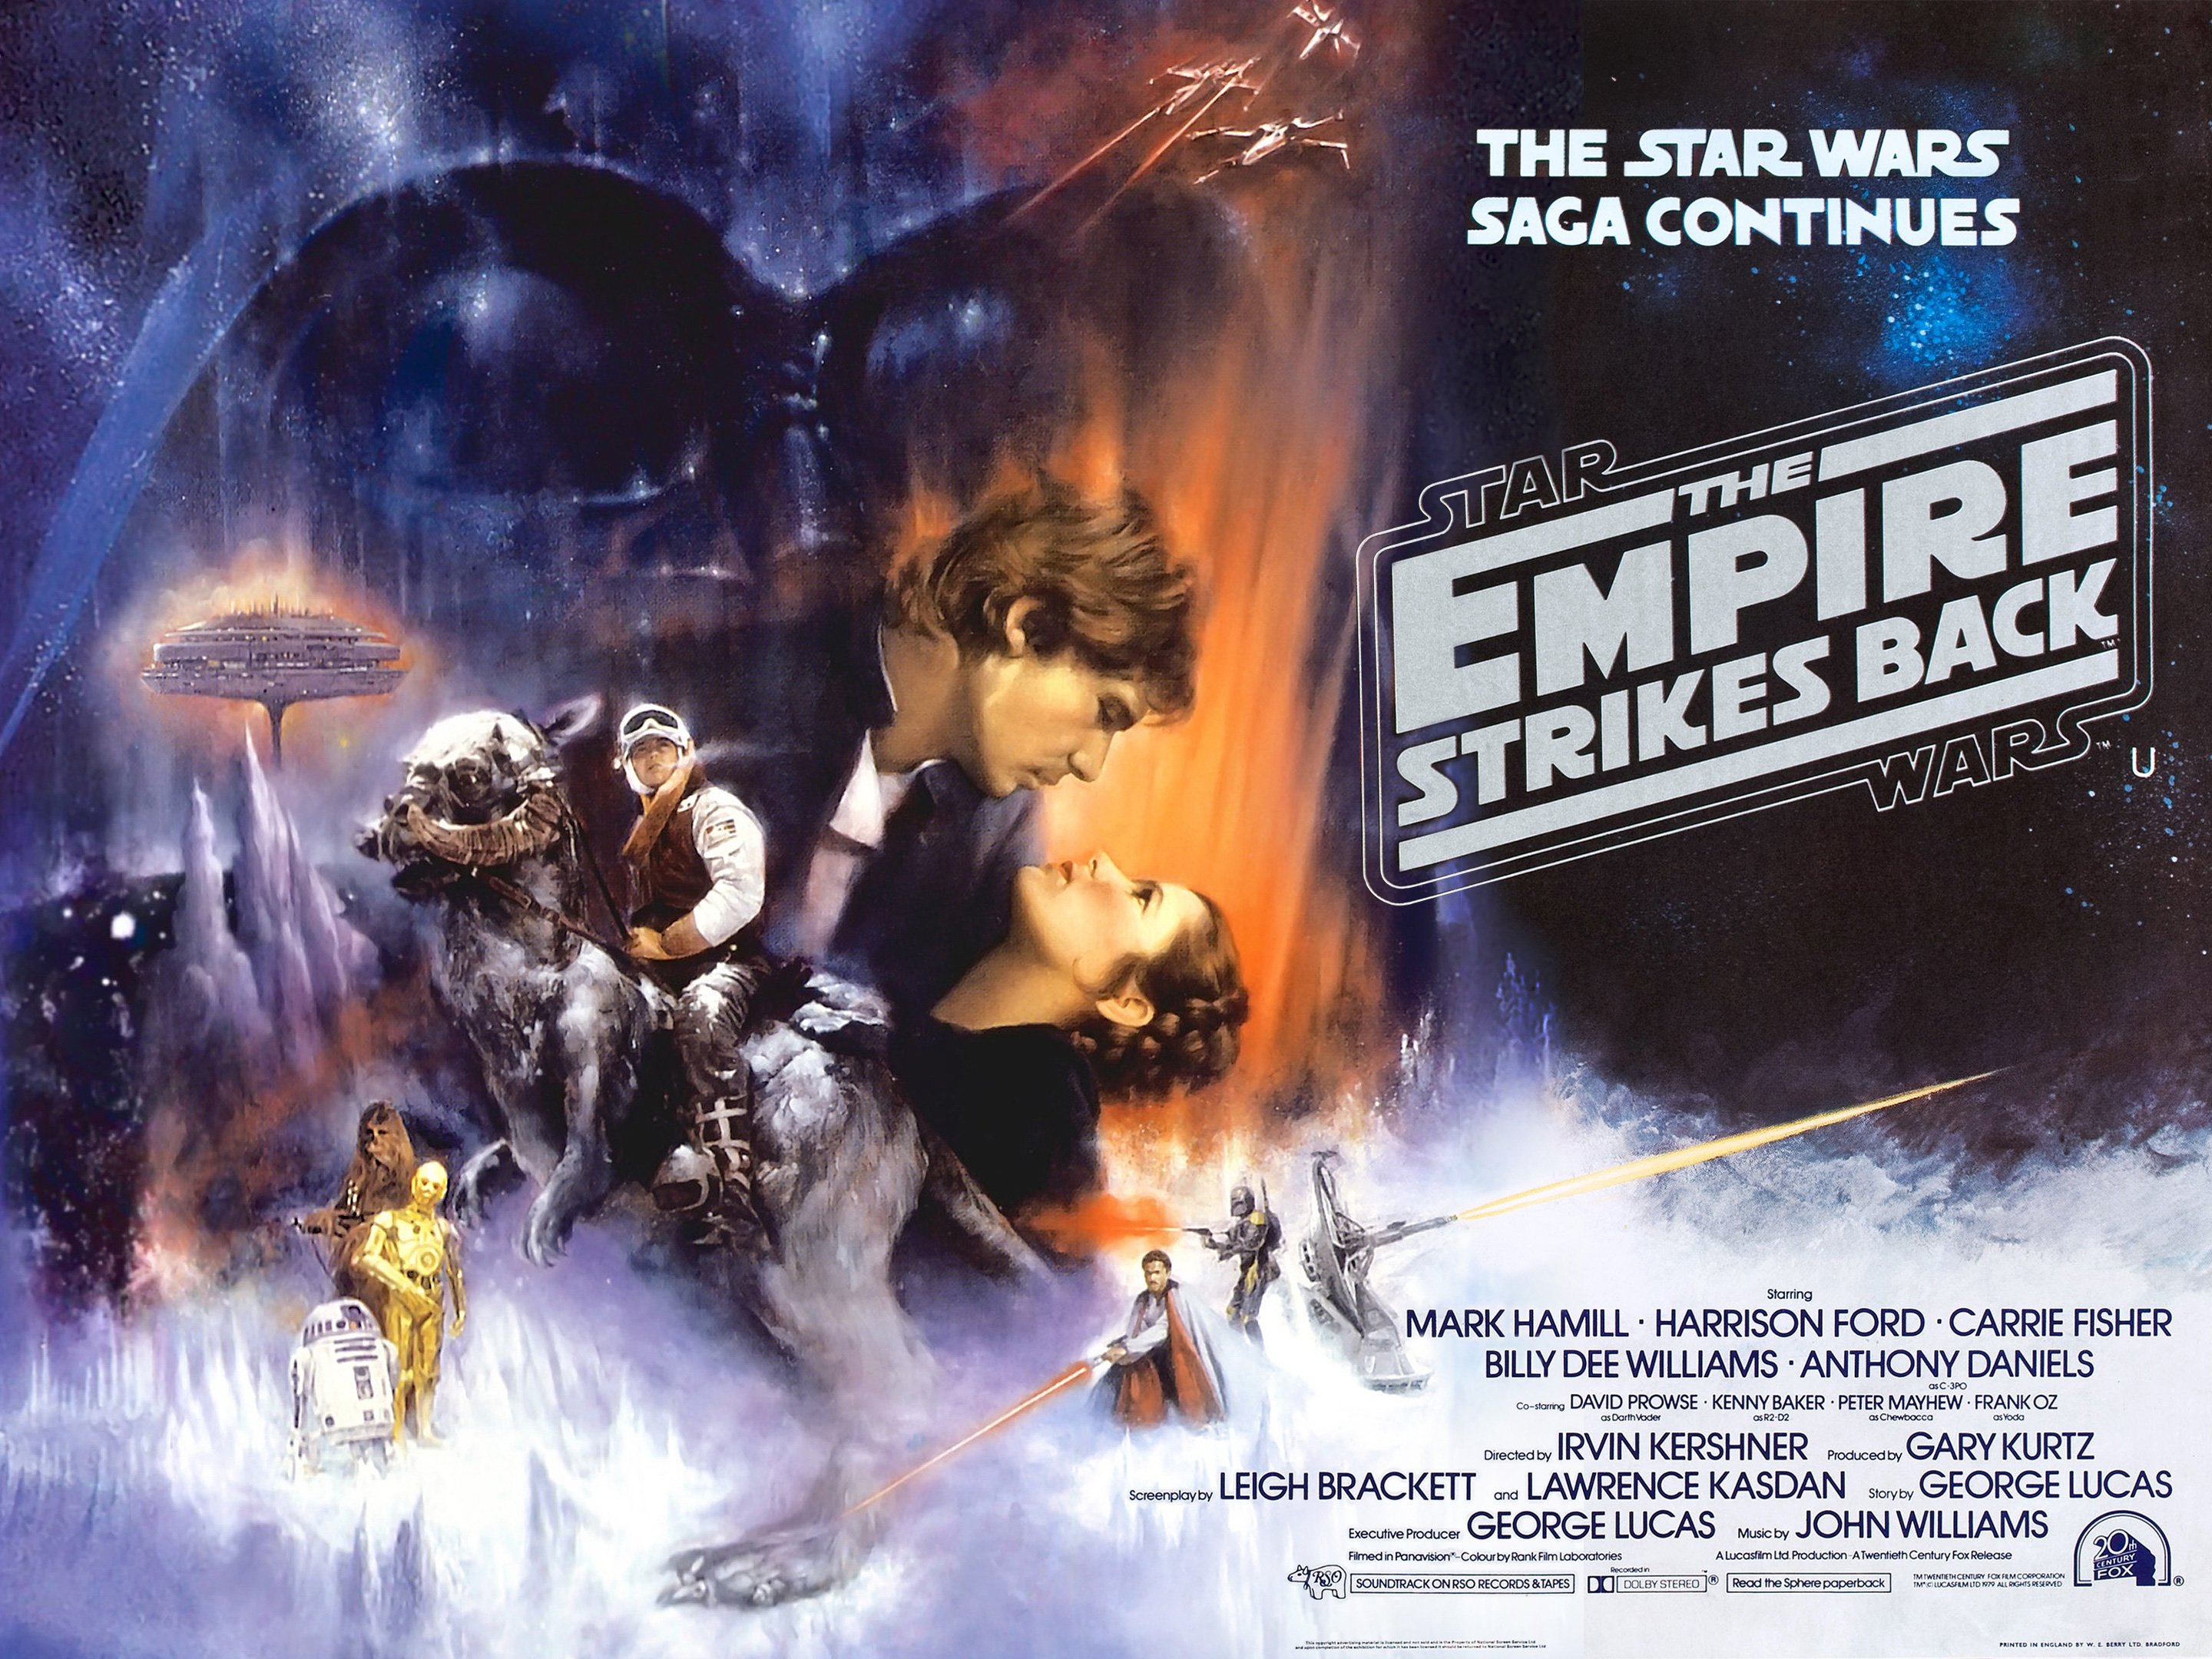 Star Wars Episode v The Empire Strikes Back - Movie Wallpapers